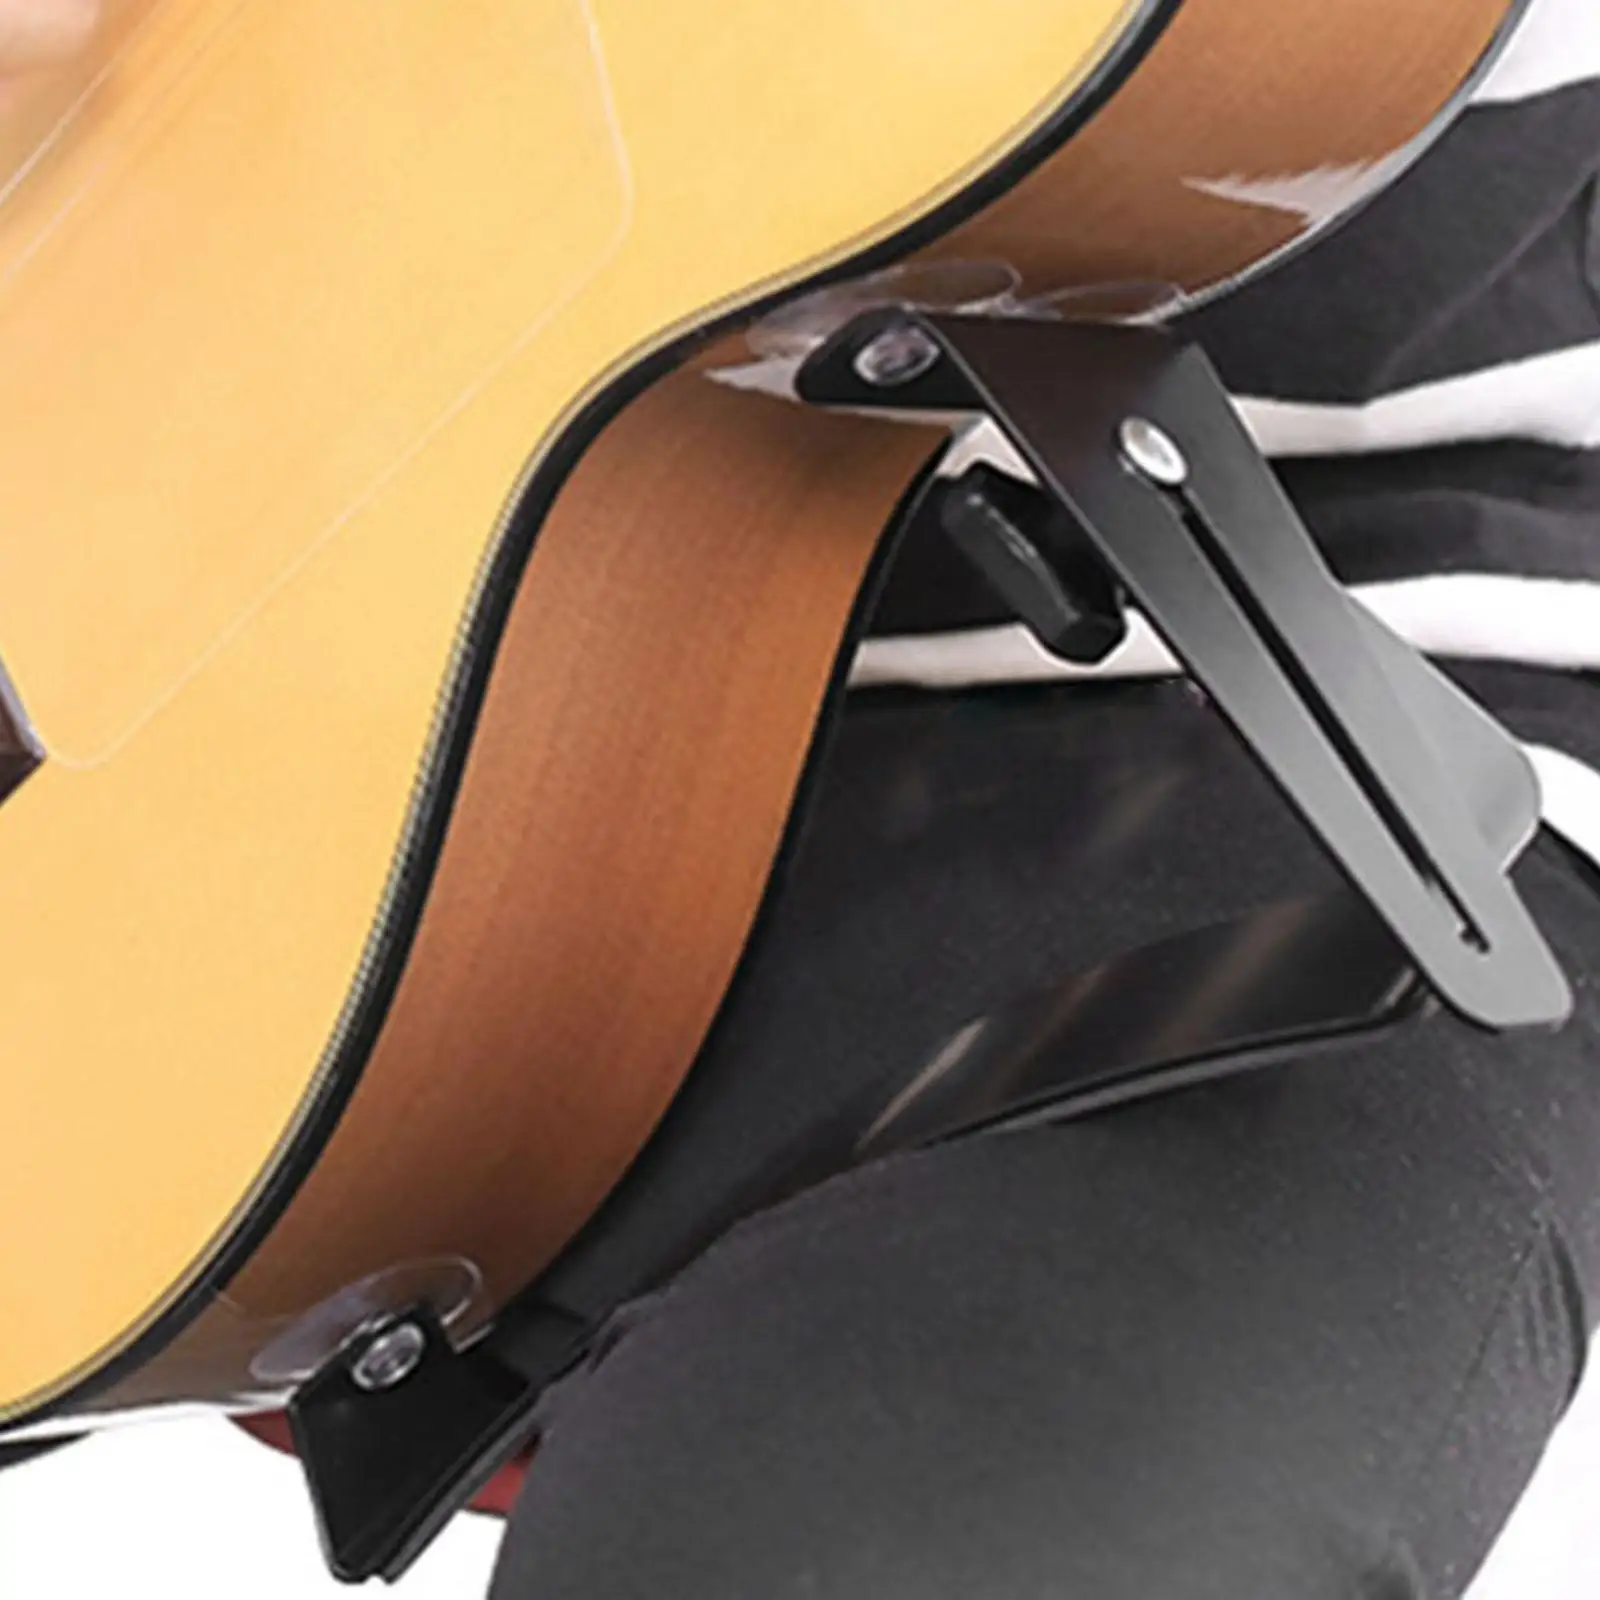 Guitar Support,Guitar Cushion with Suction Cup,Guitar Foot Stool,Guitar Neck Rest Support Cradle